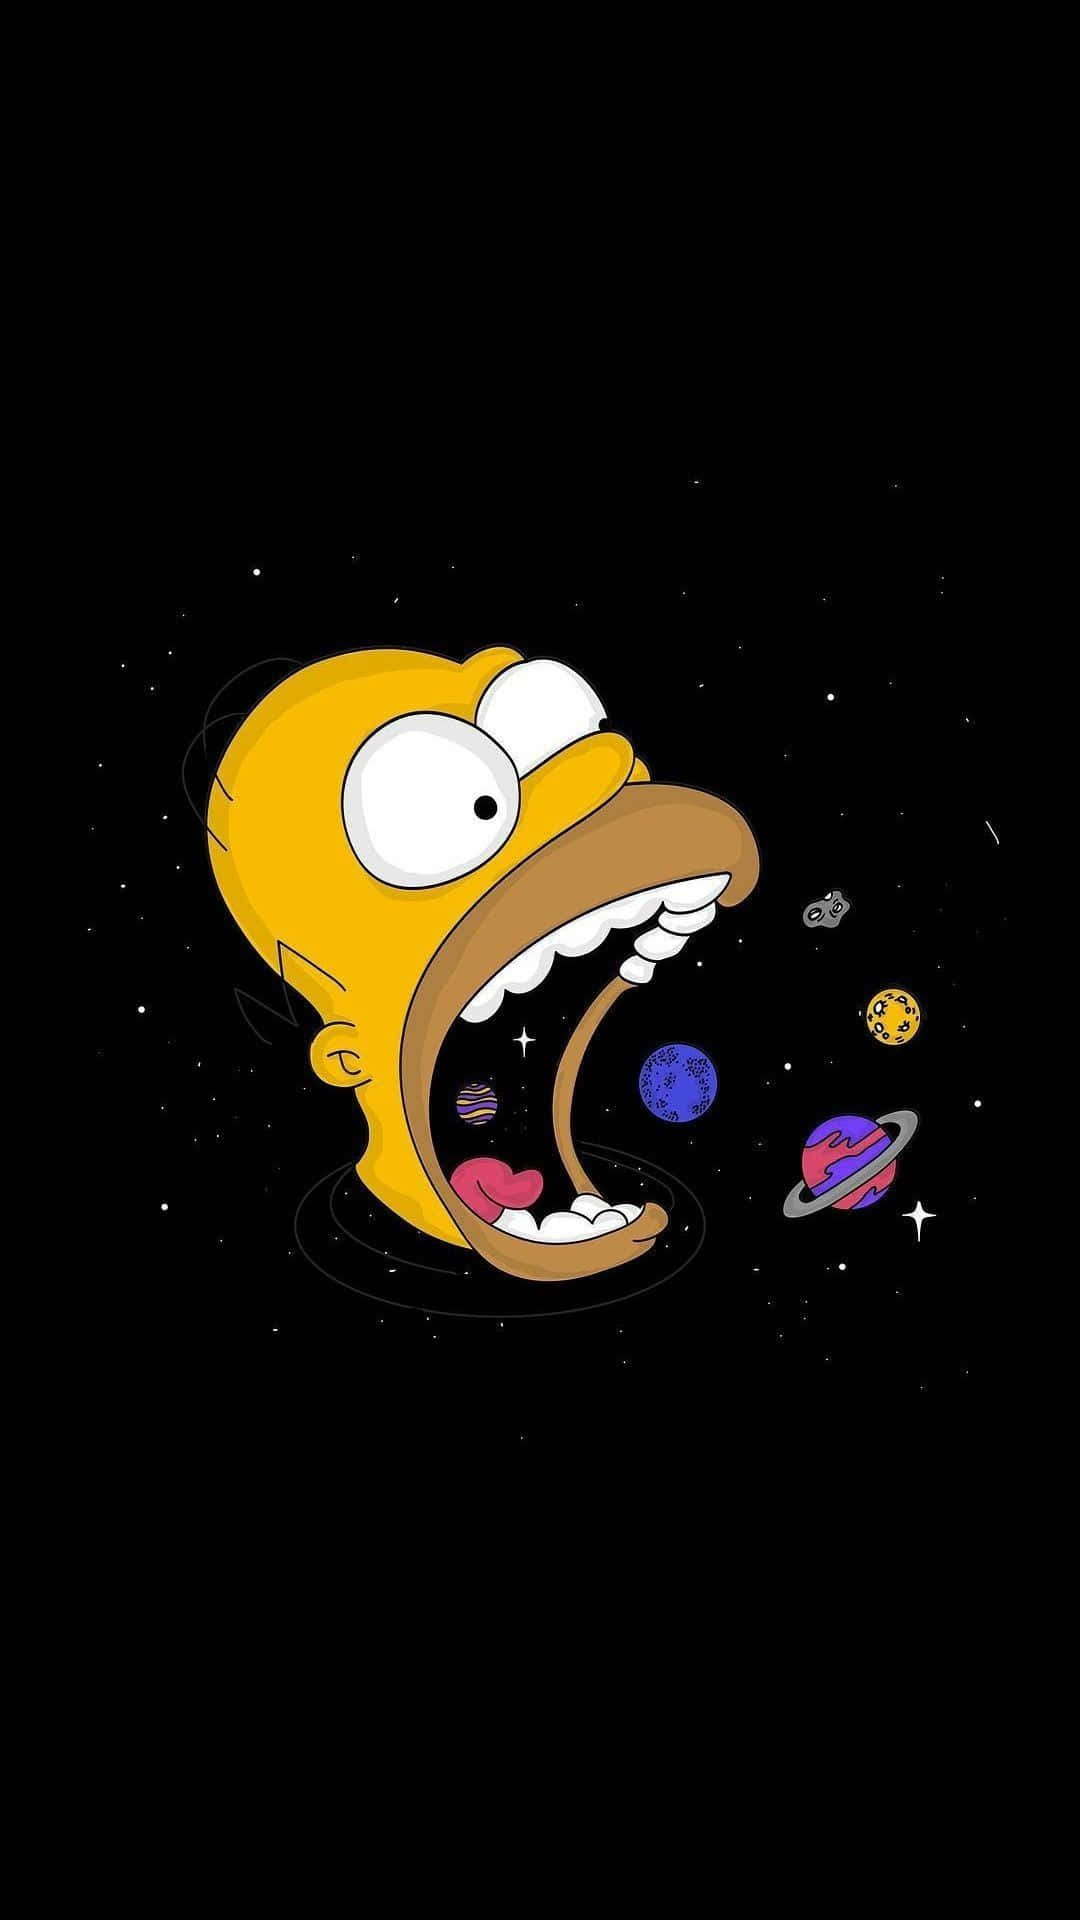 Funny Simpsons Homer Swallowing Planets Wallpaper